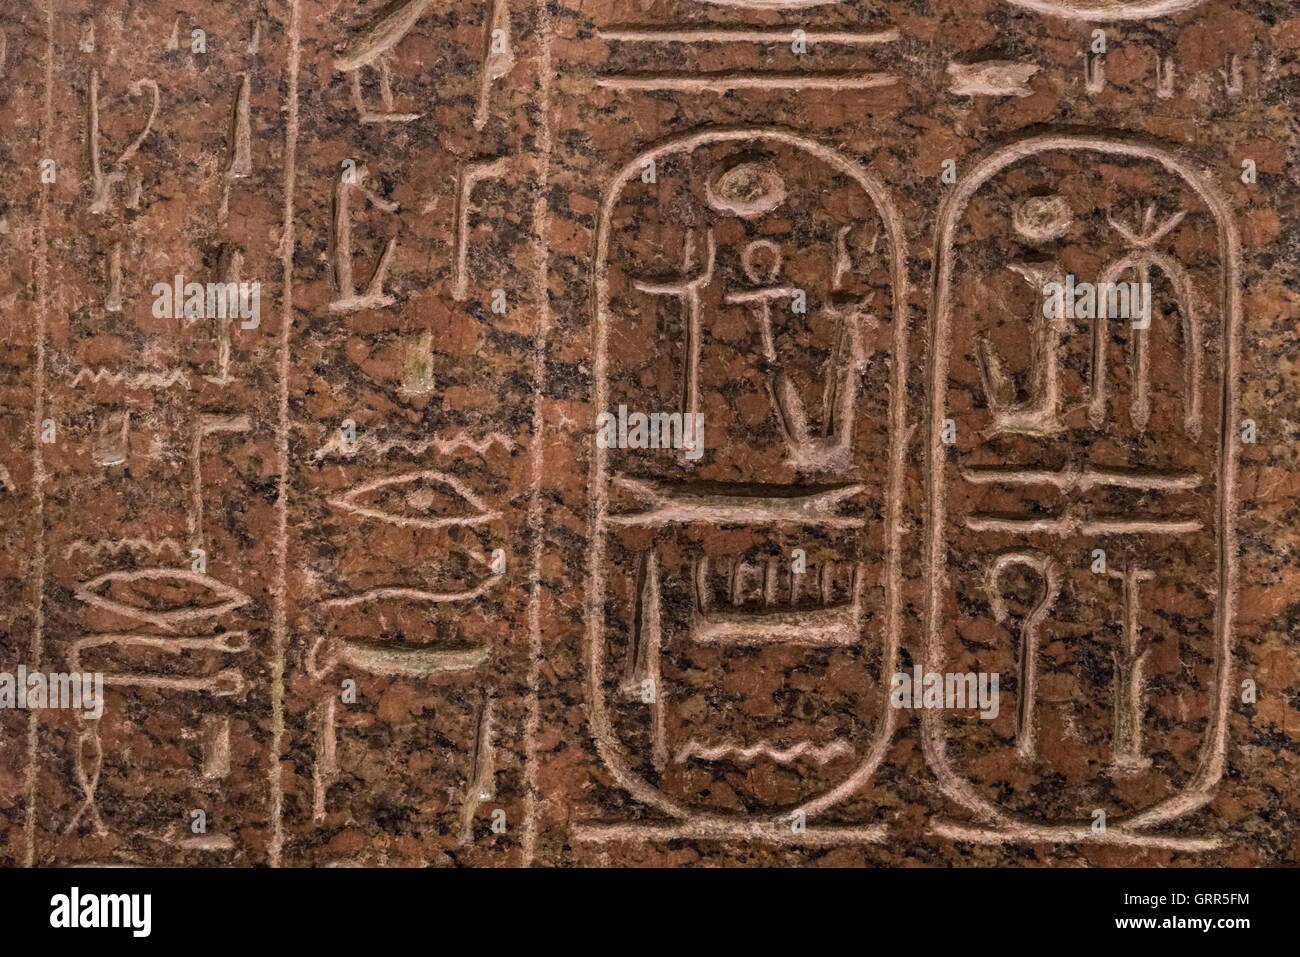 Egyptian hieroglyphics on Sarcophagus of King Ramses III, at The Louvre Museum, Paris, France Stock Photo